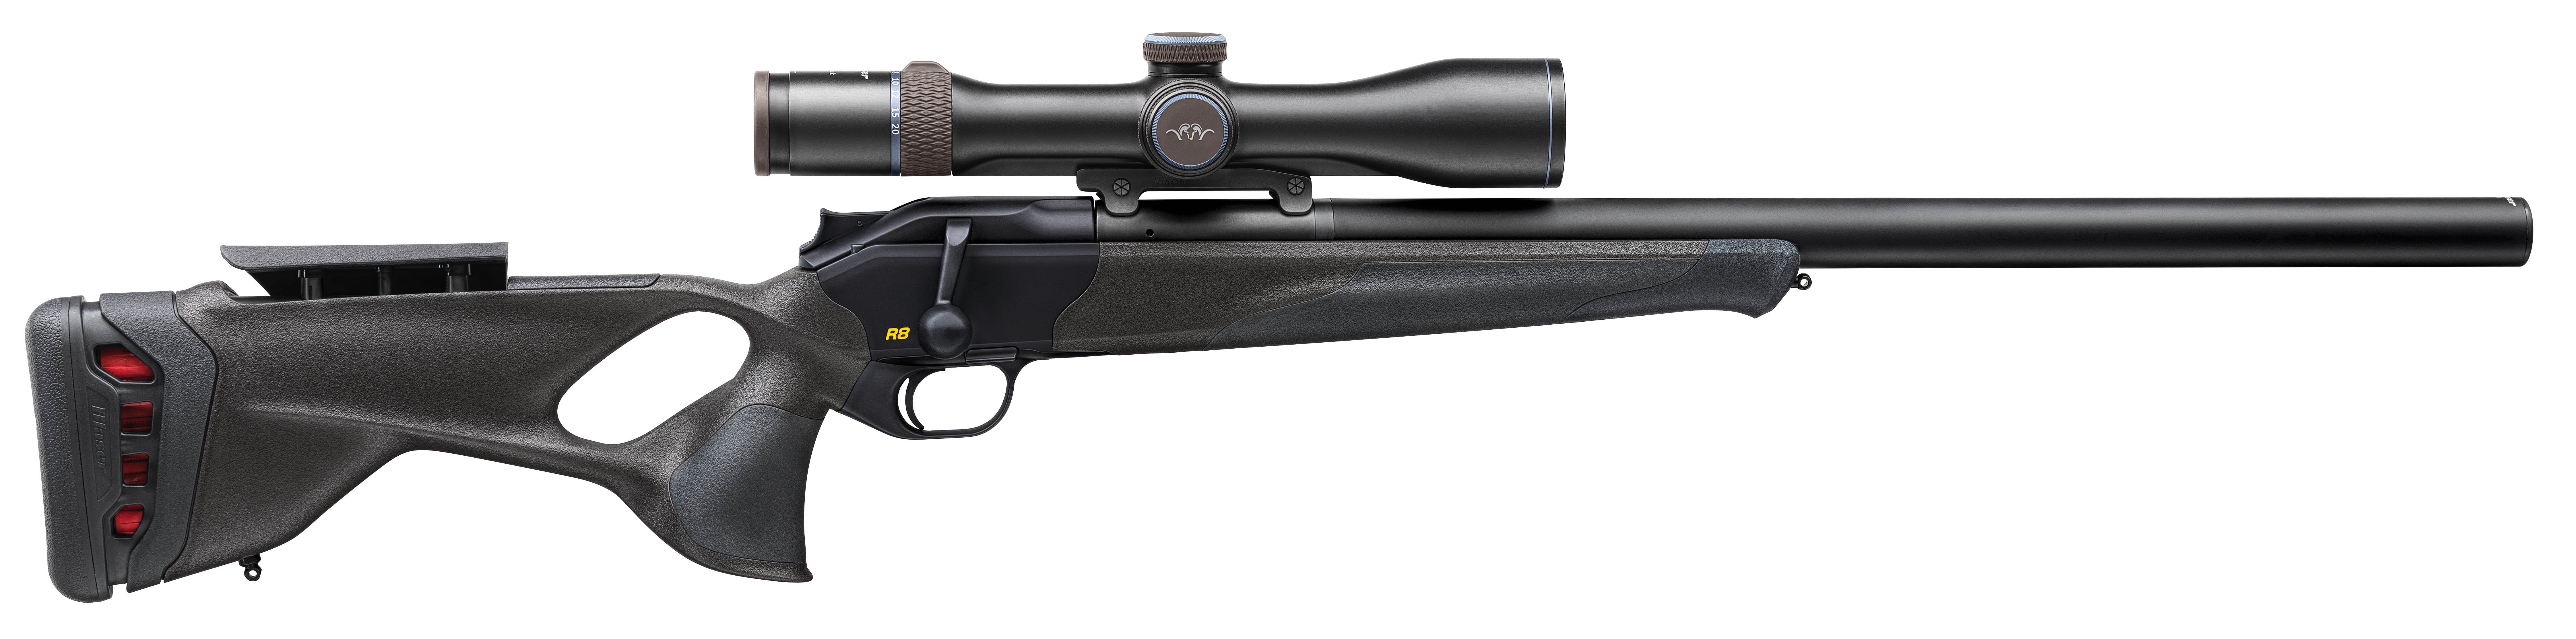 New 6.5 PRC Caliber Offering for the Blaser R8 Rifle